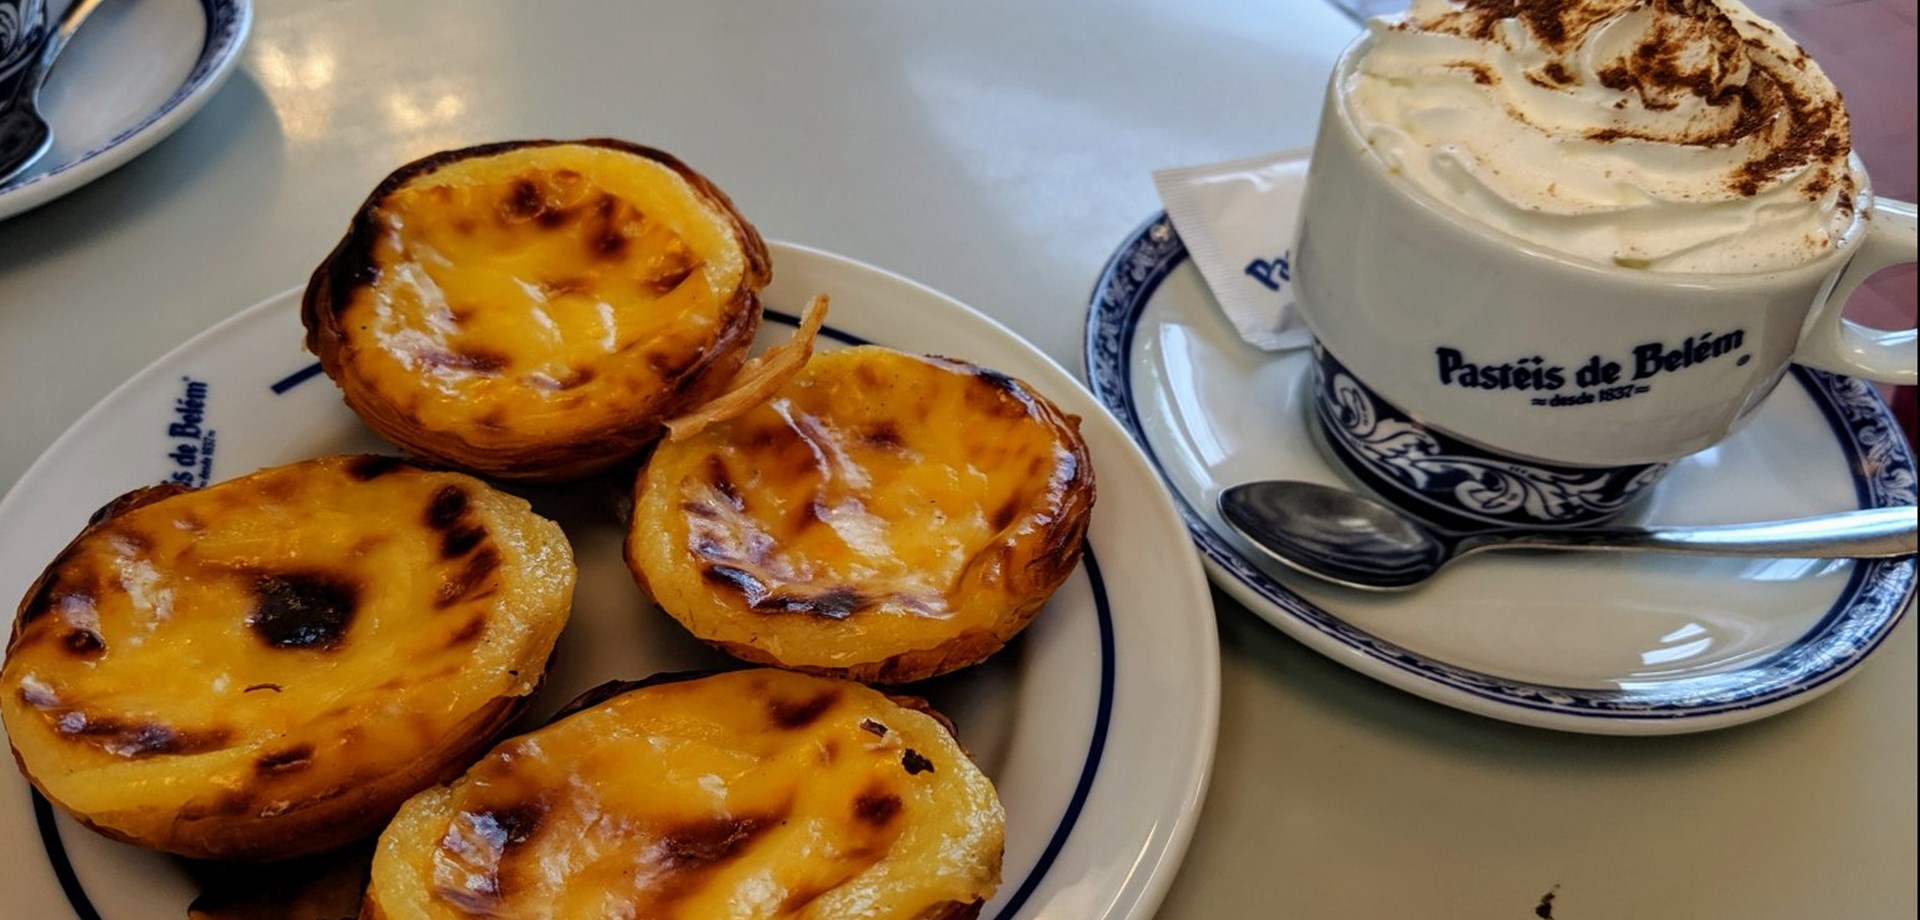 In 2009 The Guardian listed pastéis de Belém as one of the 50 best things to eat in the world